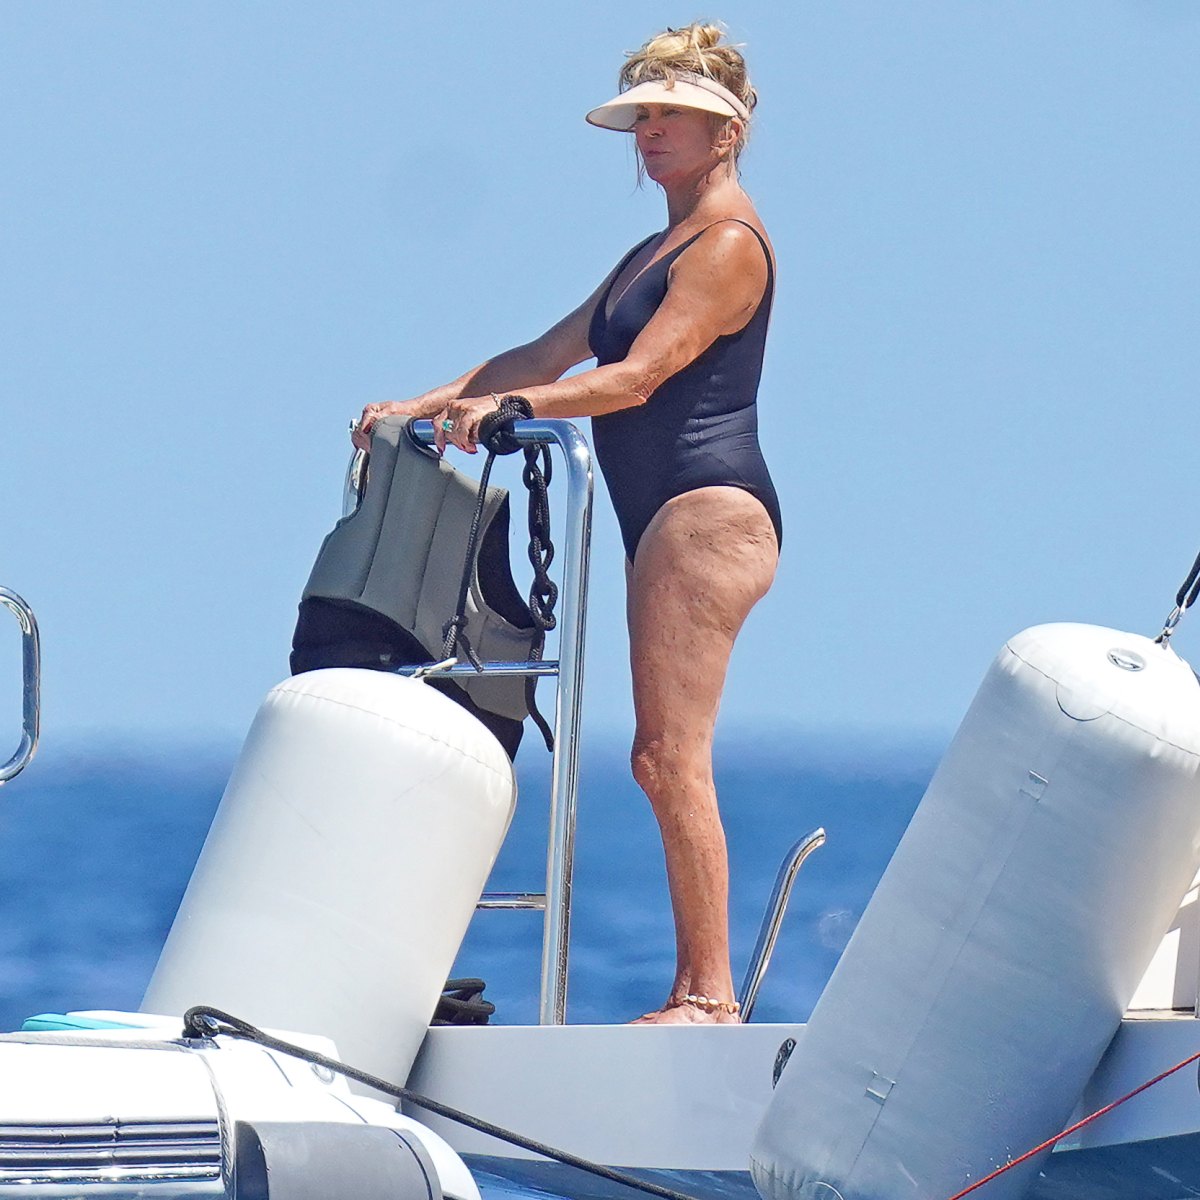 Goldie Hawn, 70, flaunts enviable figure in plunging gold swimsuit